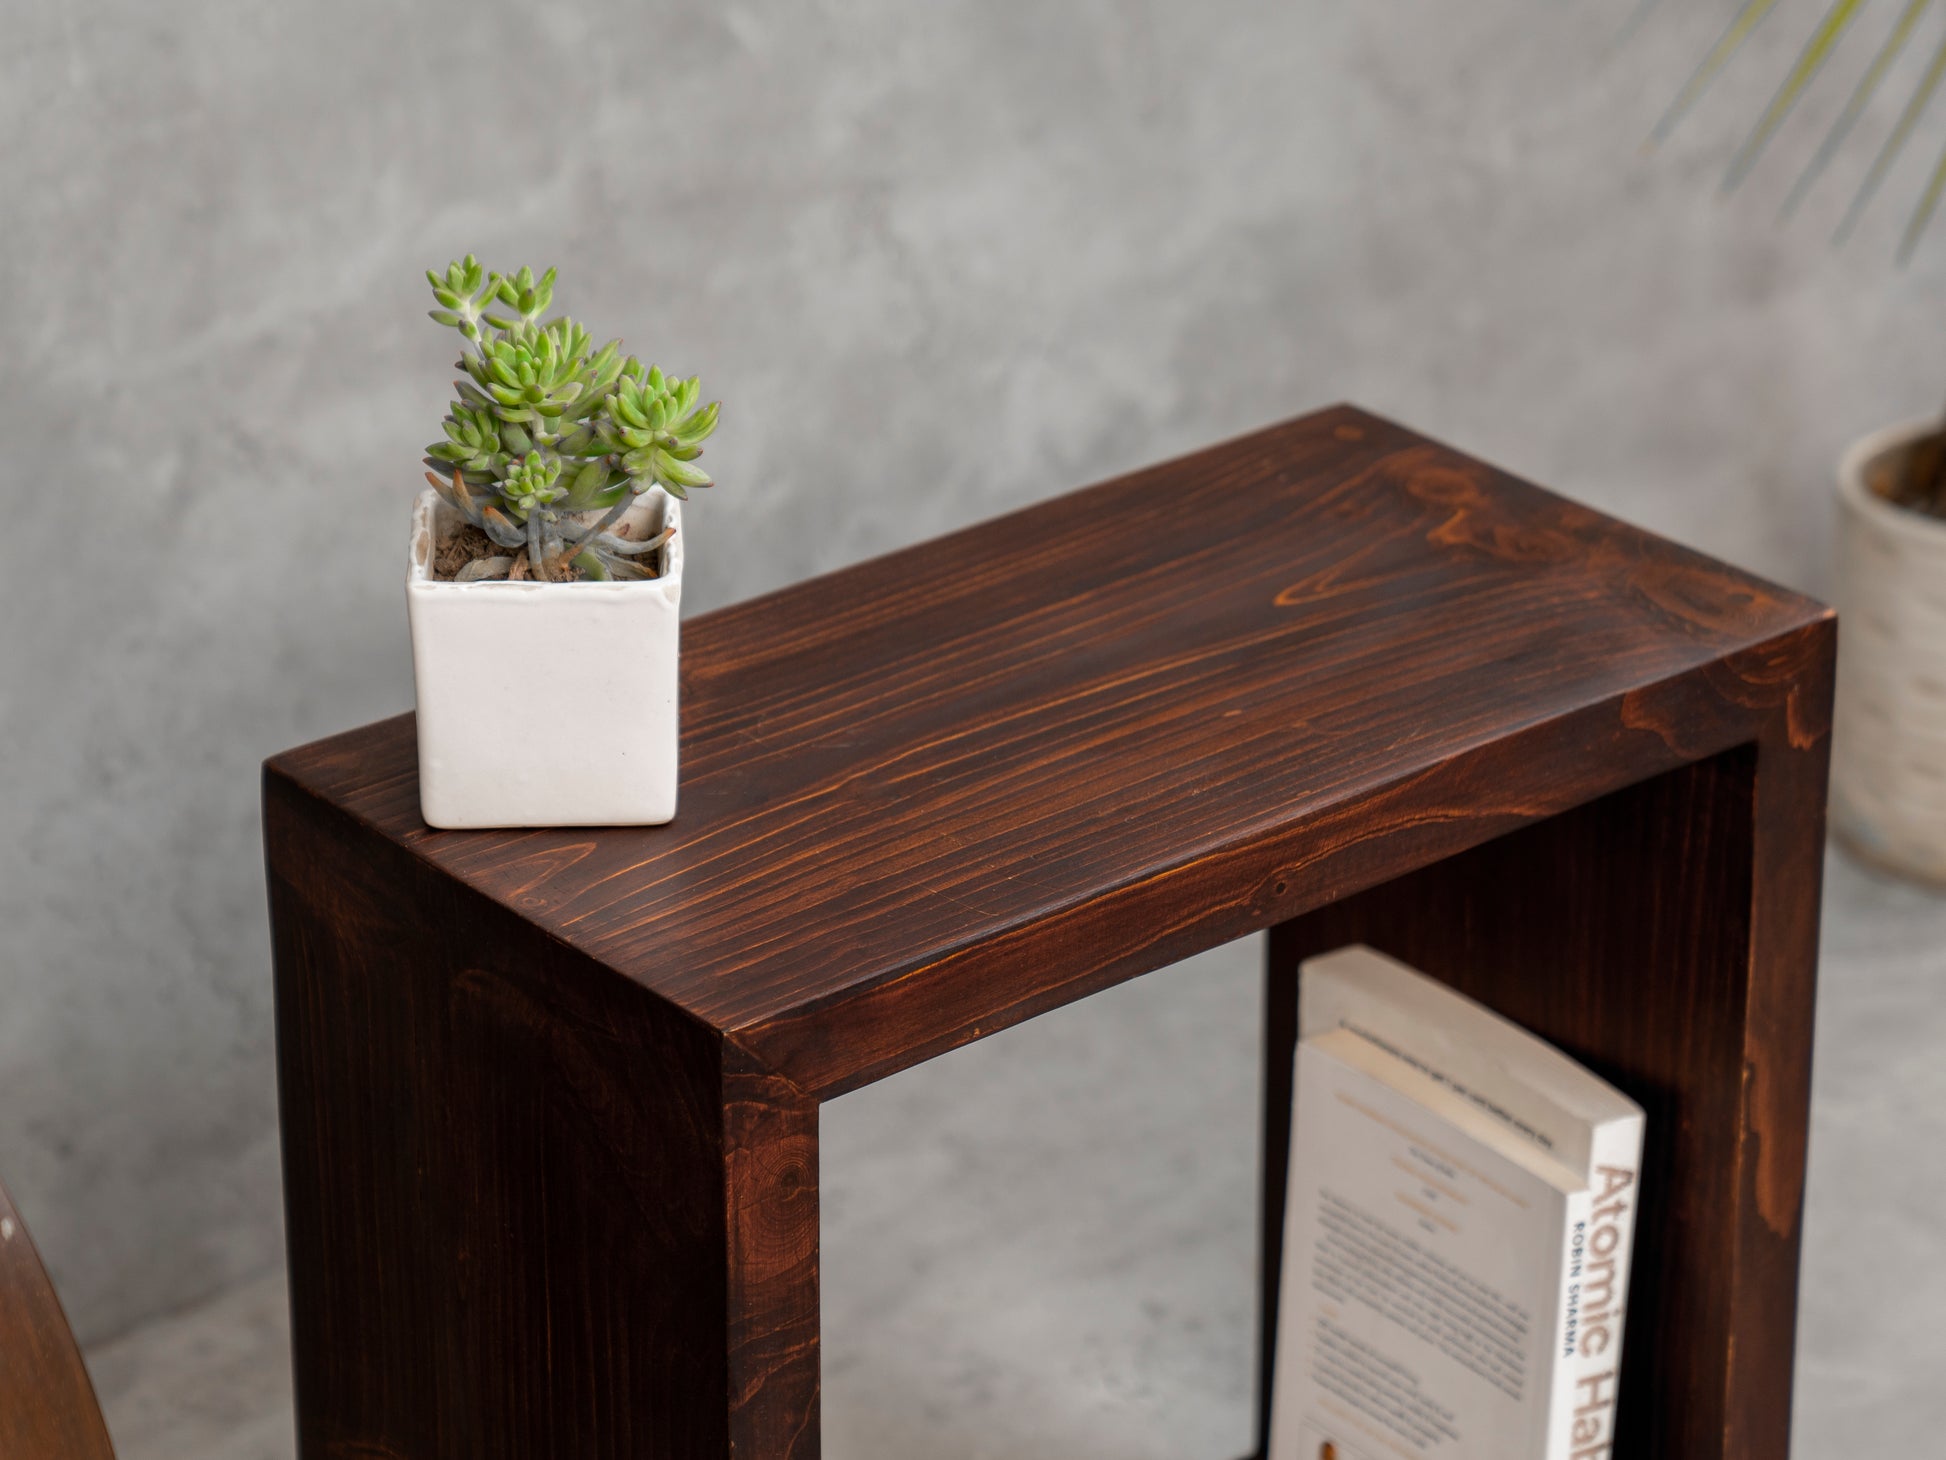 Side Table, Wooden End Table, Living Room Decor, Wooden Side Table, Living Room Table